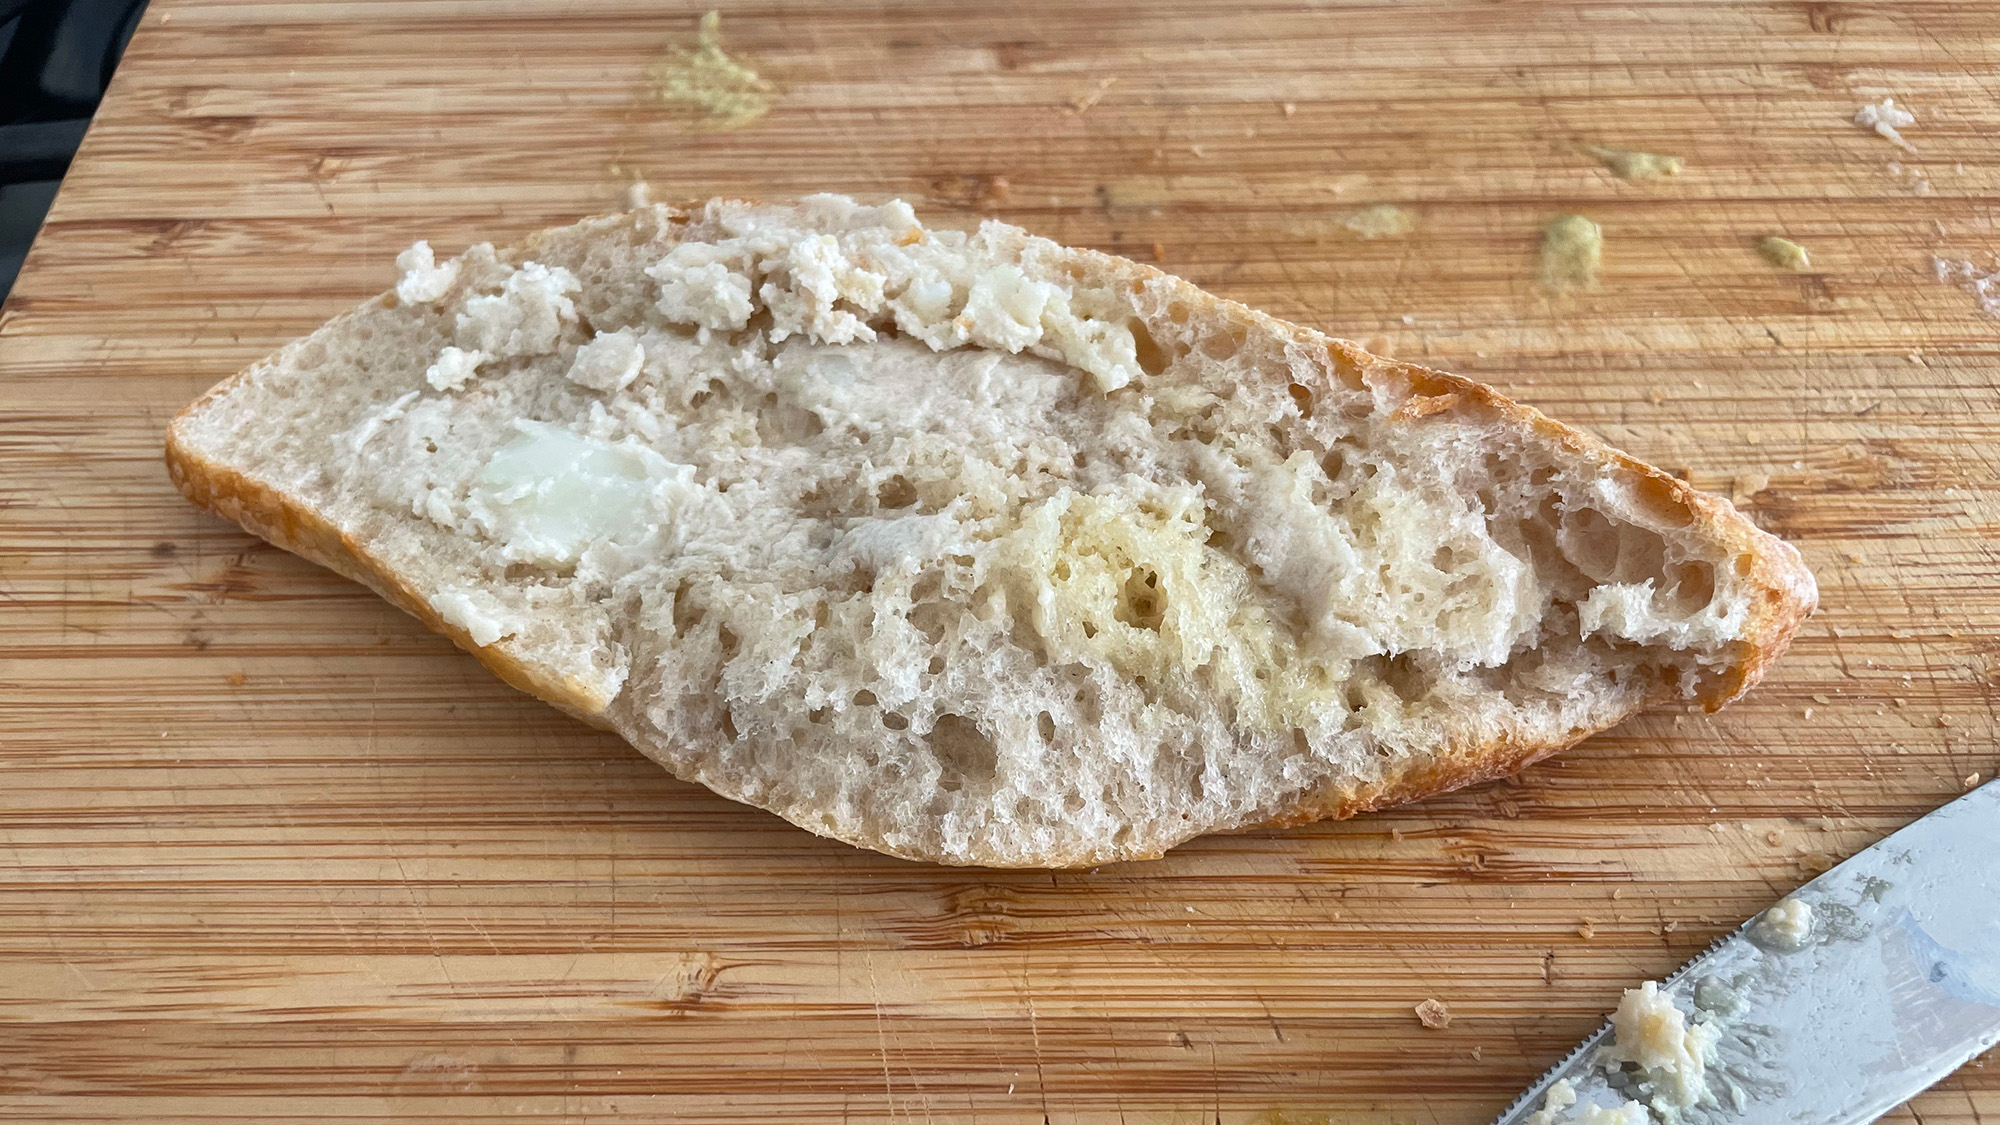 A piece of toast with homemade vegan butter on it